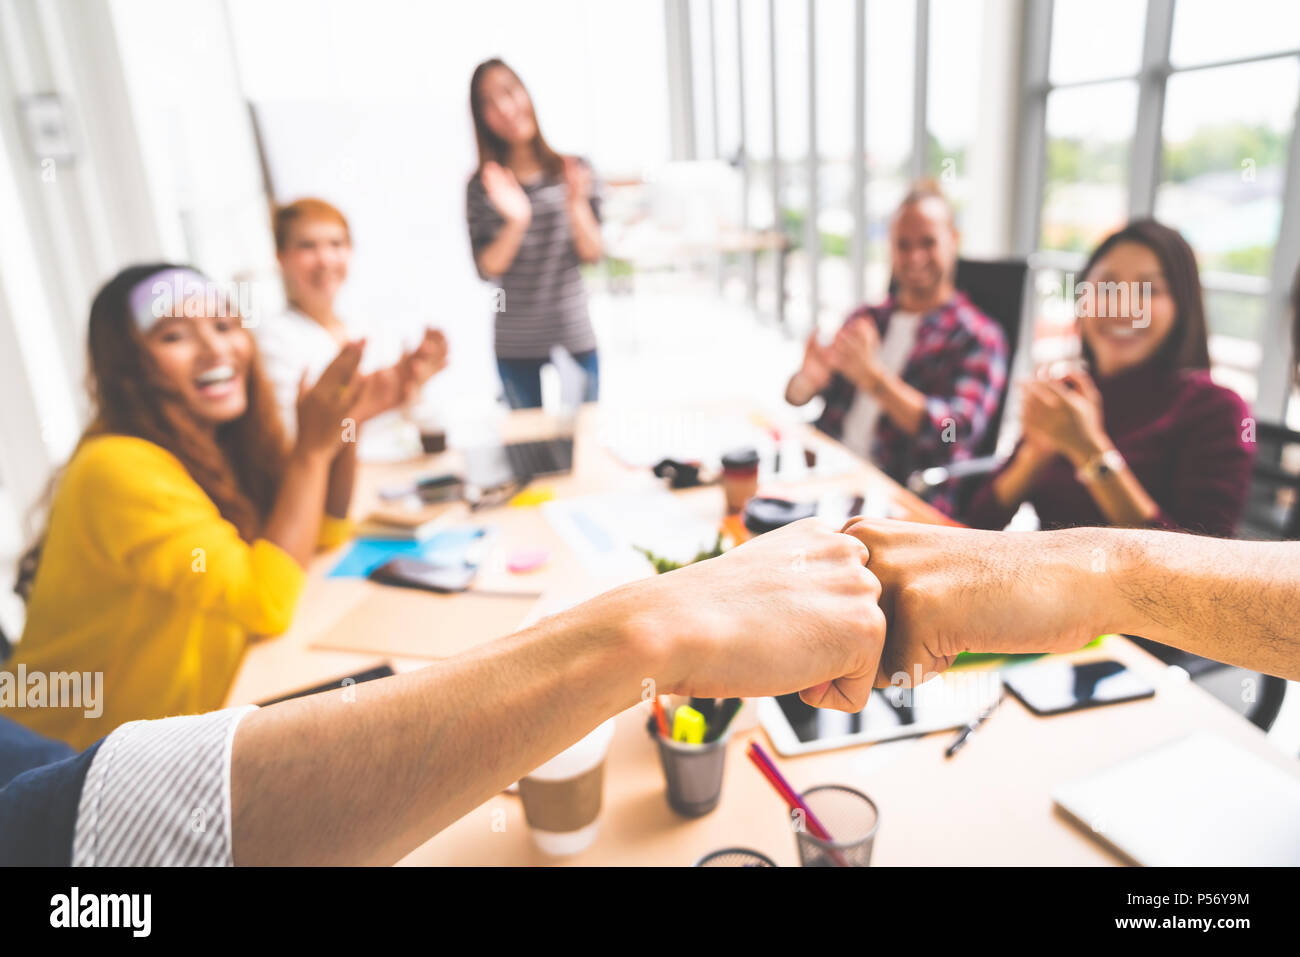 Business partners or men coworkers fist bump in team meeting, multiethnic diverse group of happy colleagues clapping hands. Teamwork concept Stock Photo